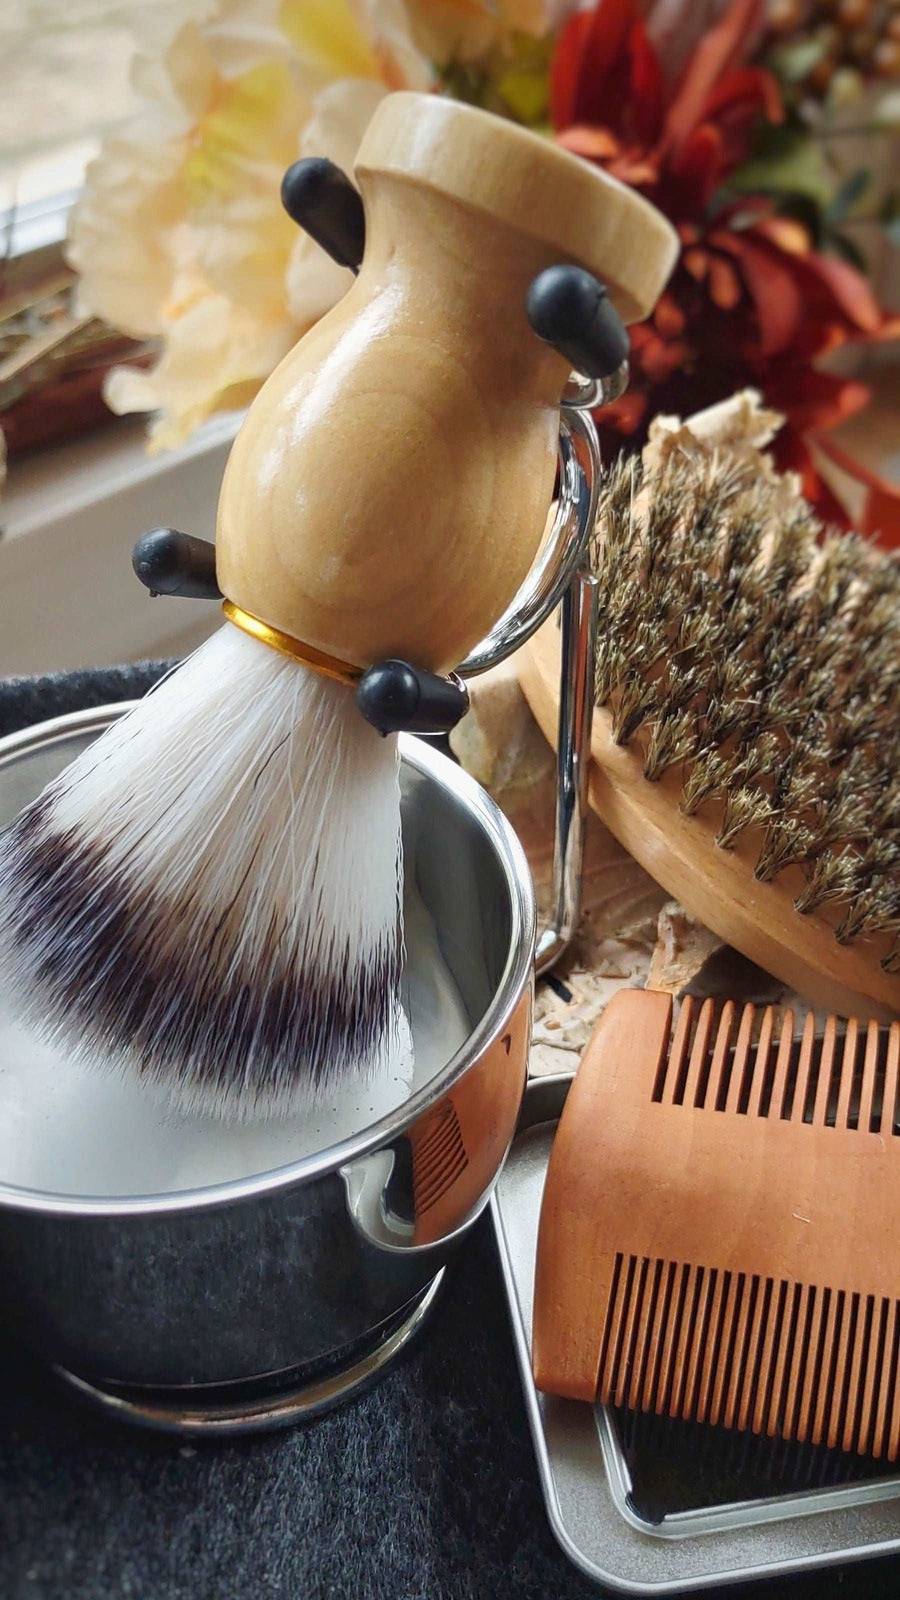 LATHER & SHAVE PUCK KIT - Handcrafted - Old Fashioned Shaving Kit - Cold Creek Natural Farm